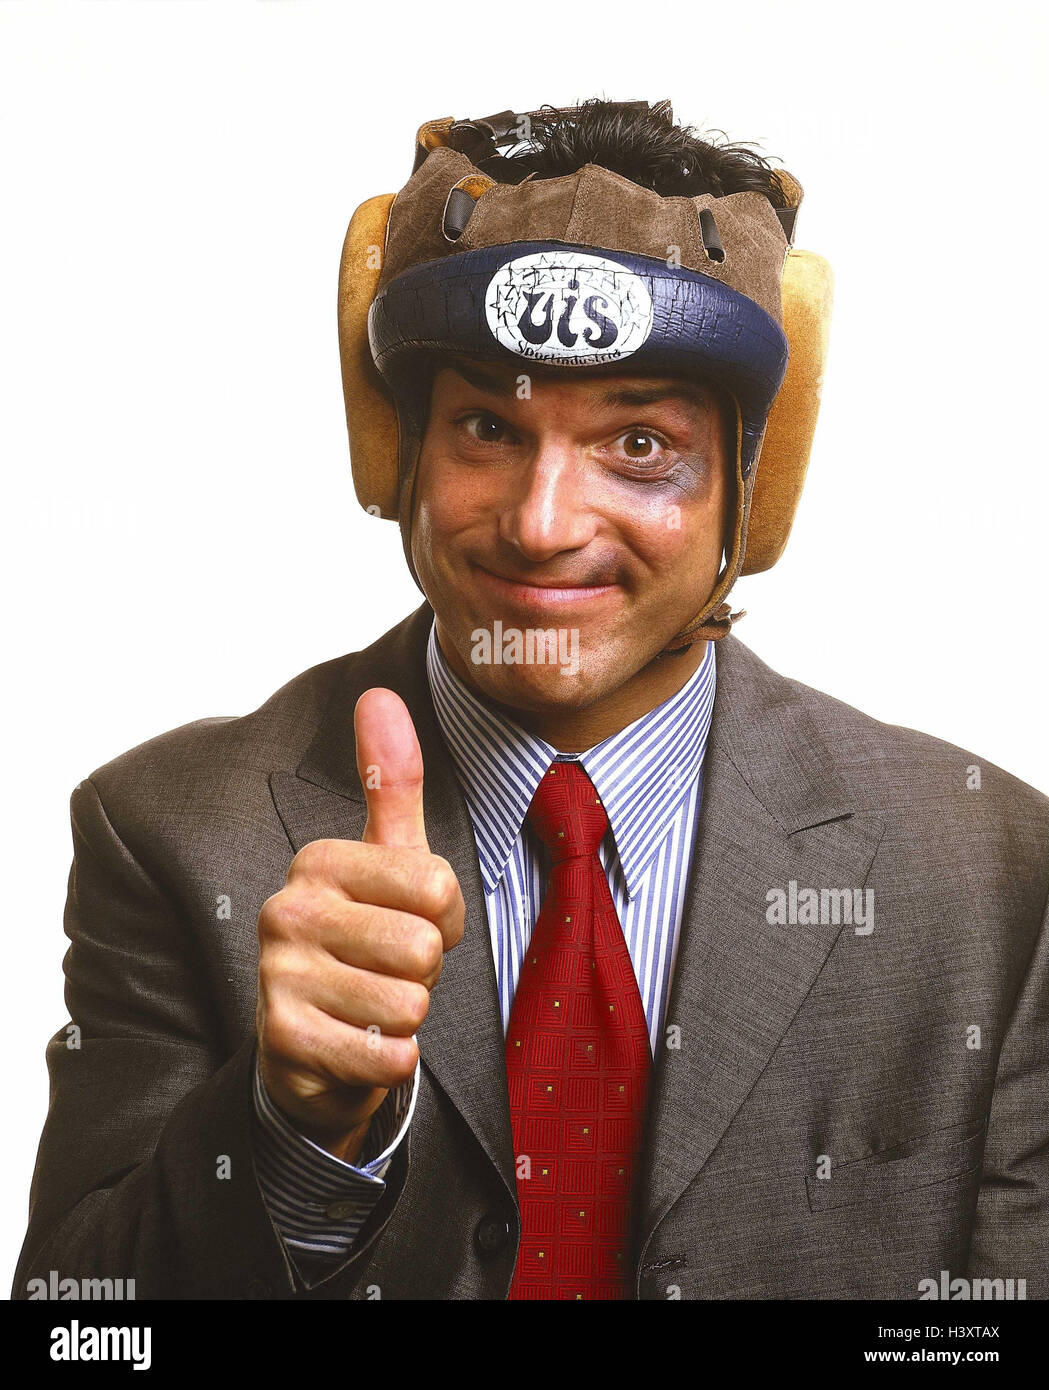 Manager, young, helmet, injury, eye, blue, gesture, pollex high, o.k., smile, fight portrait speakers, man, businessman, suit, tie, violet, 'blue eye', victory, event, sportily, contention, competition, hit, gesture, in order, okay, Stock Photo